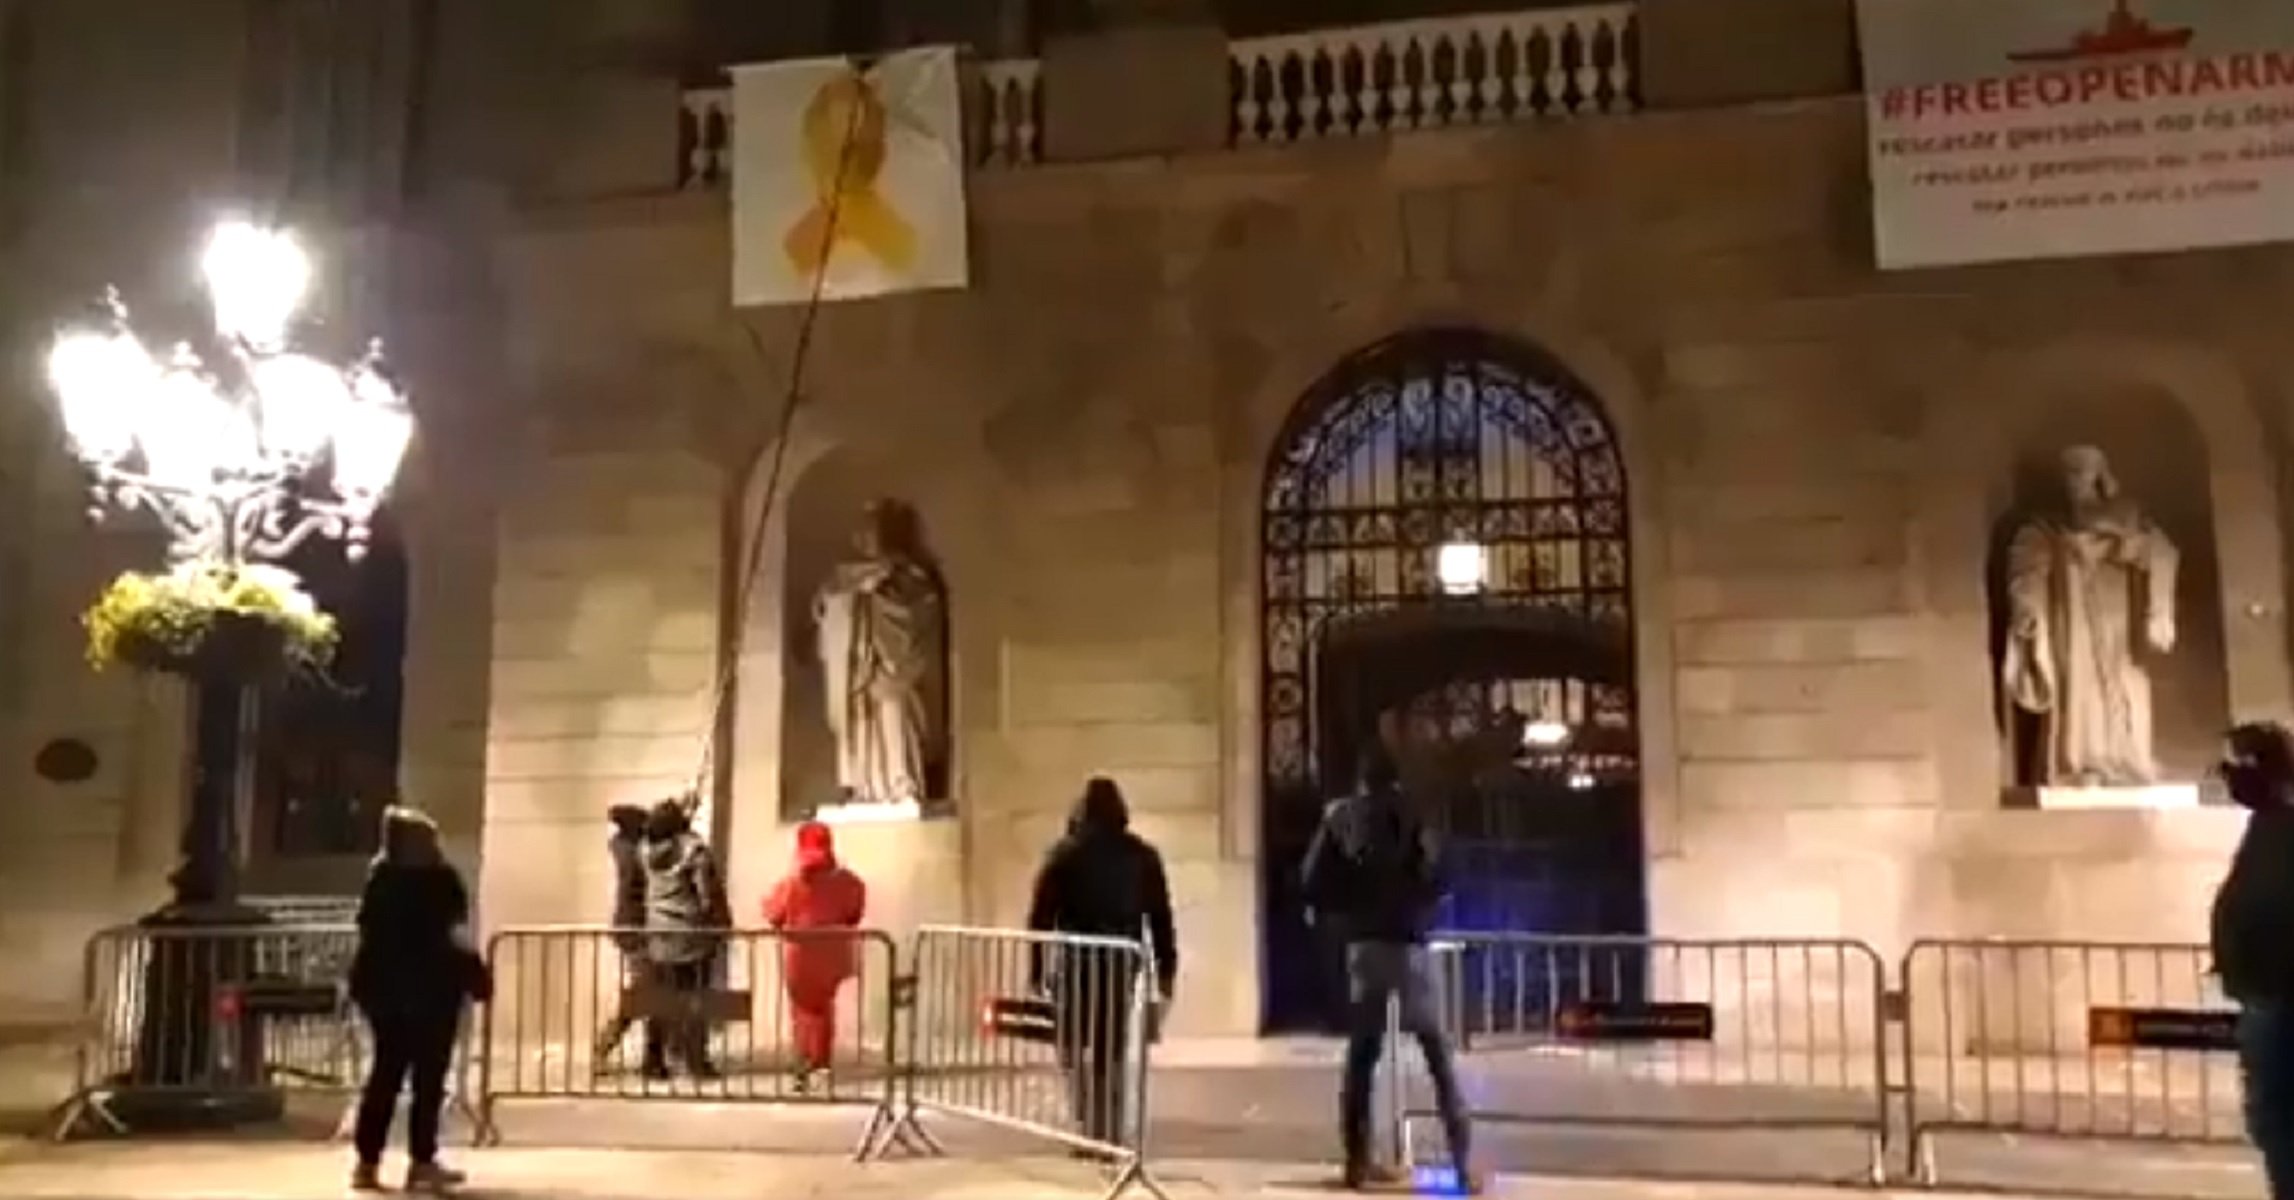 Unionists tear down yellow ribbon from Barcelona city hall in overnight attack